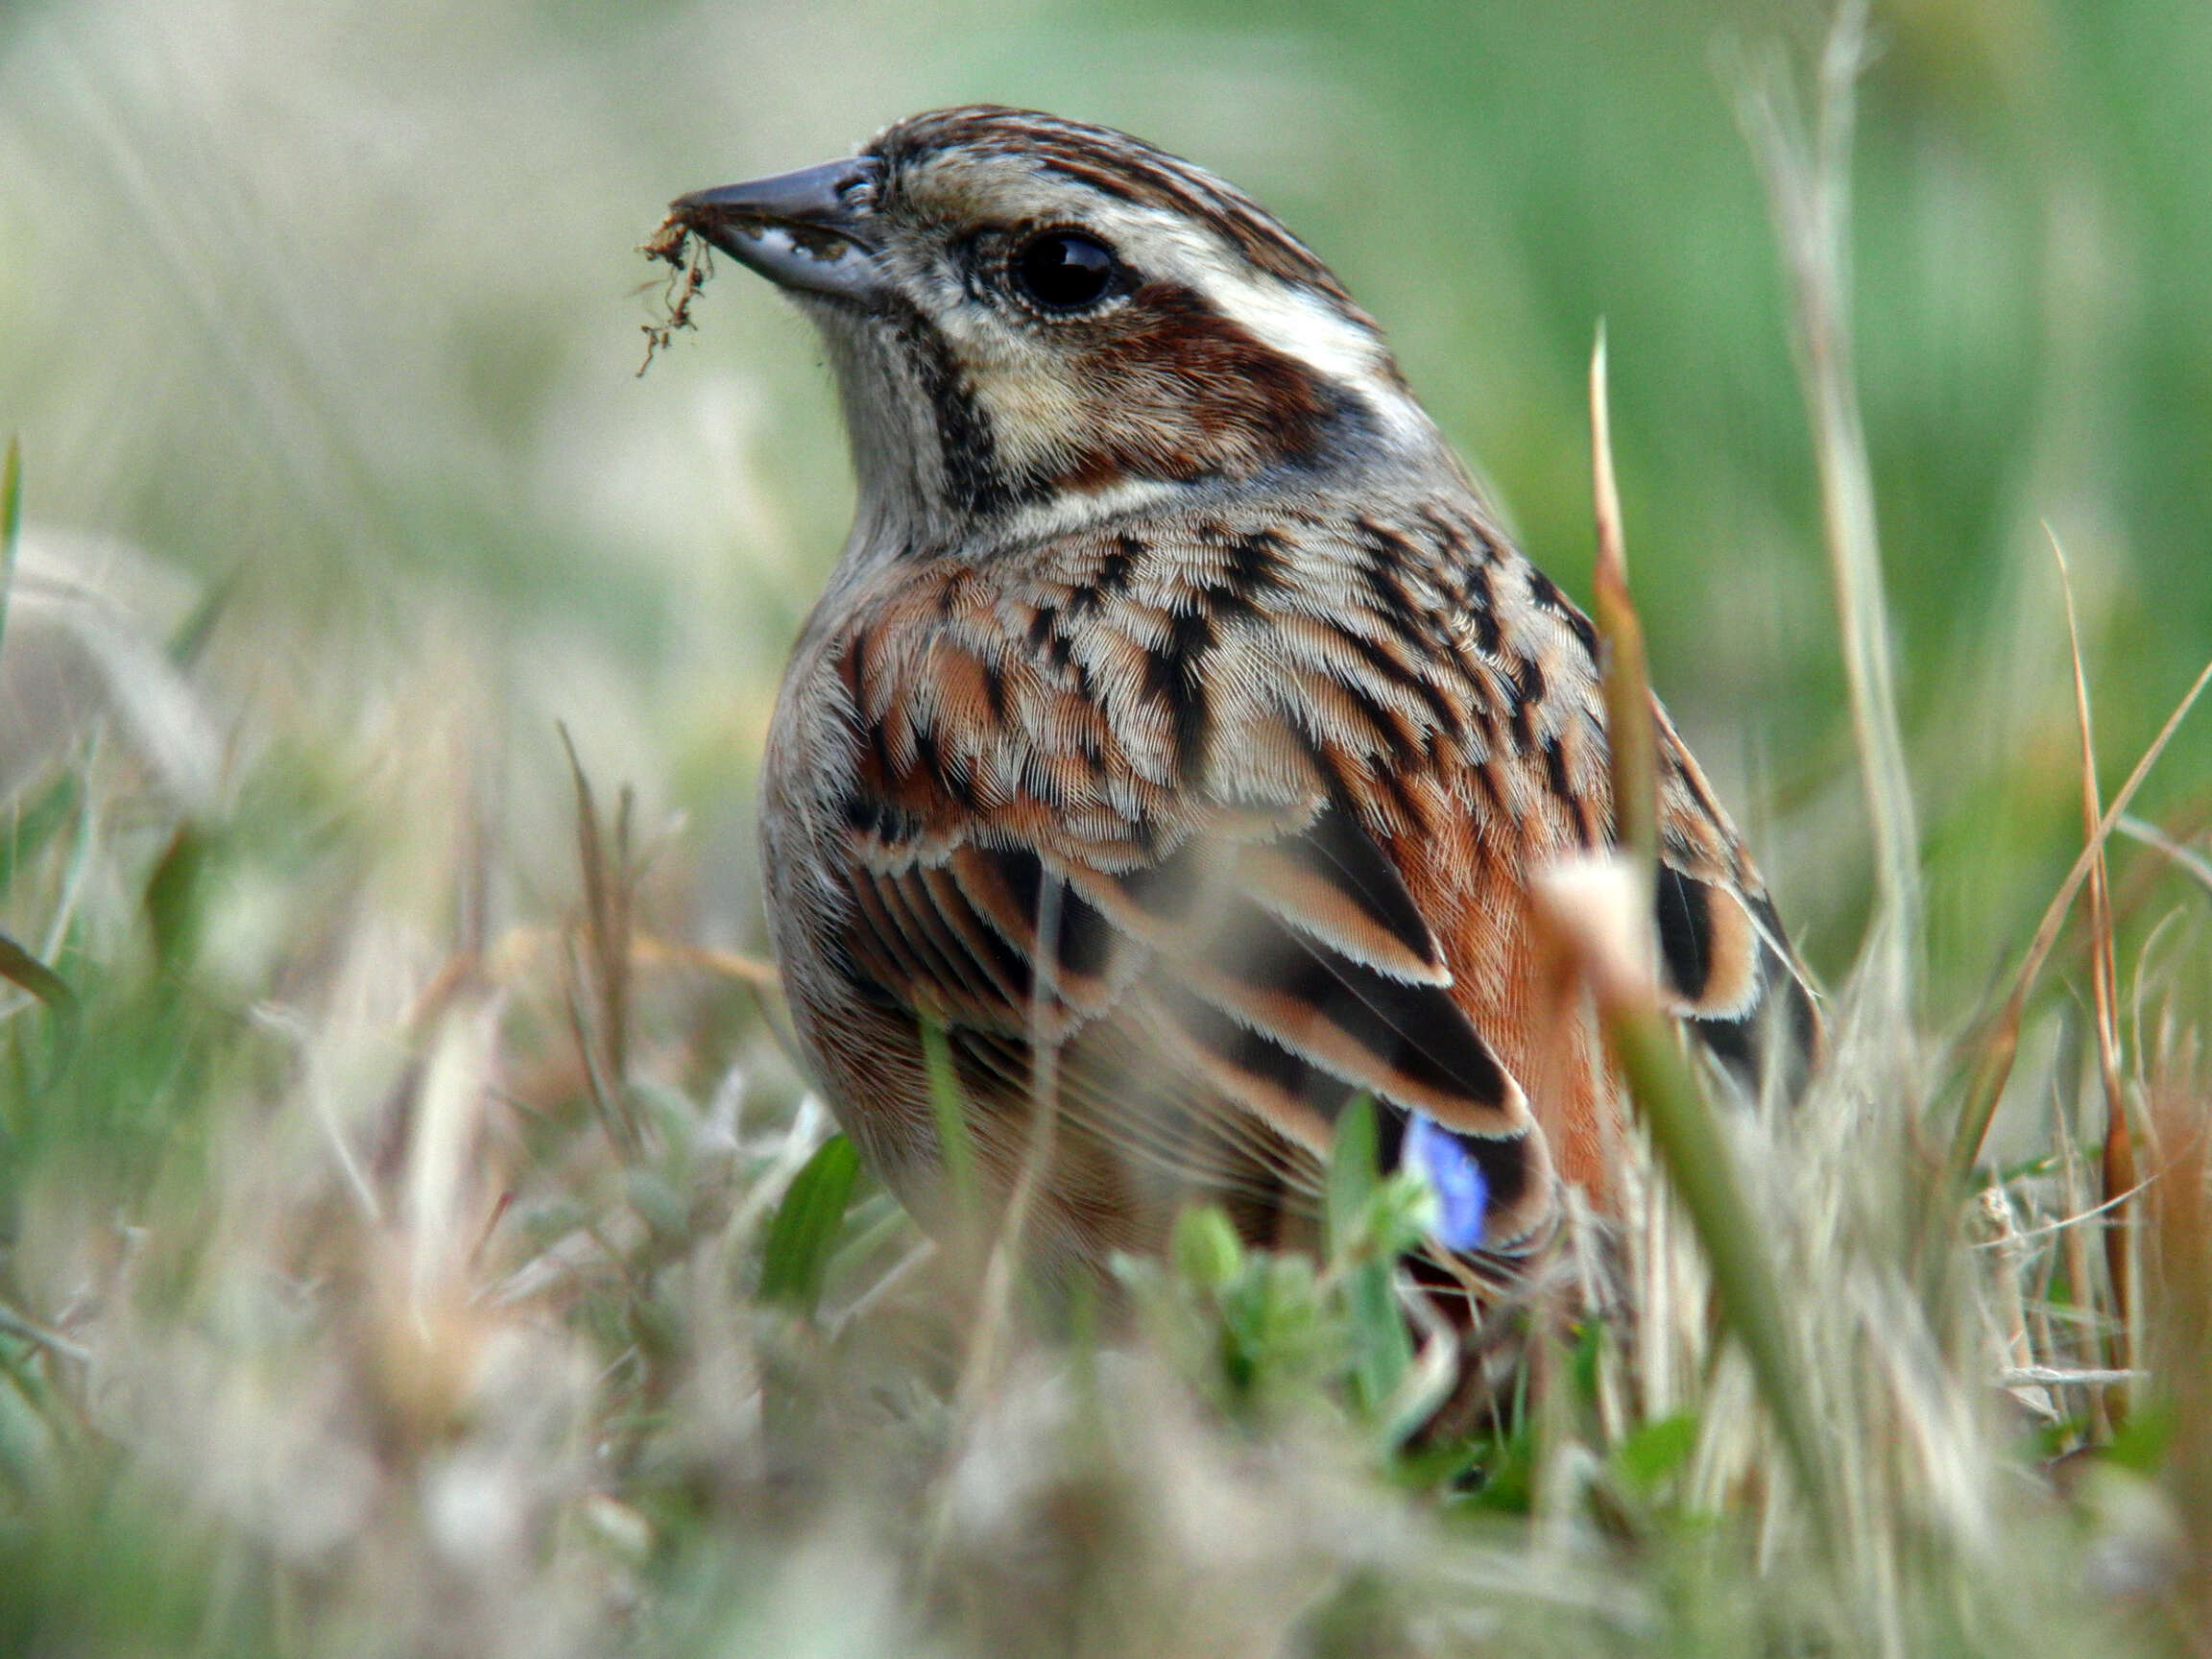 Image of Meadow Bunting